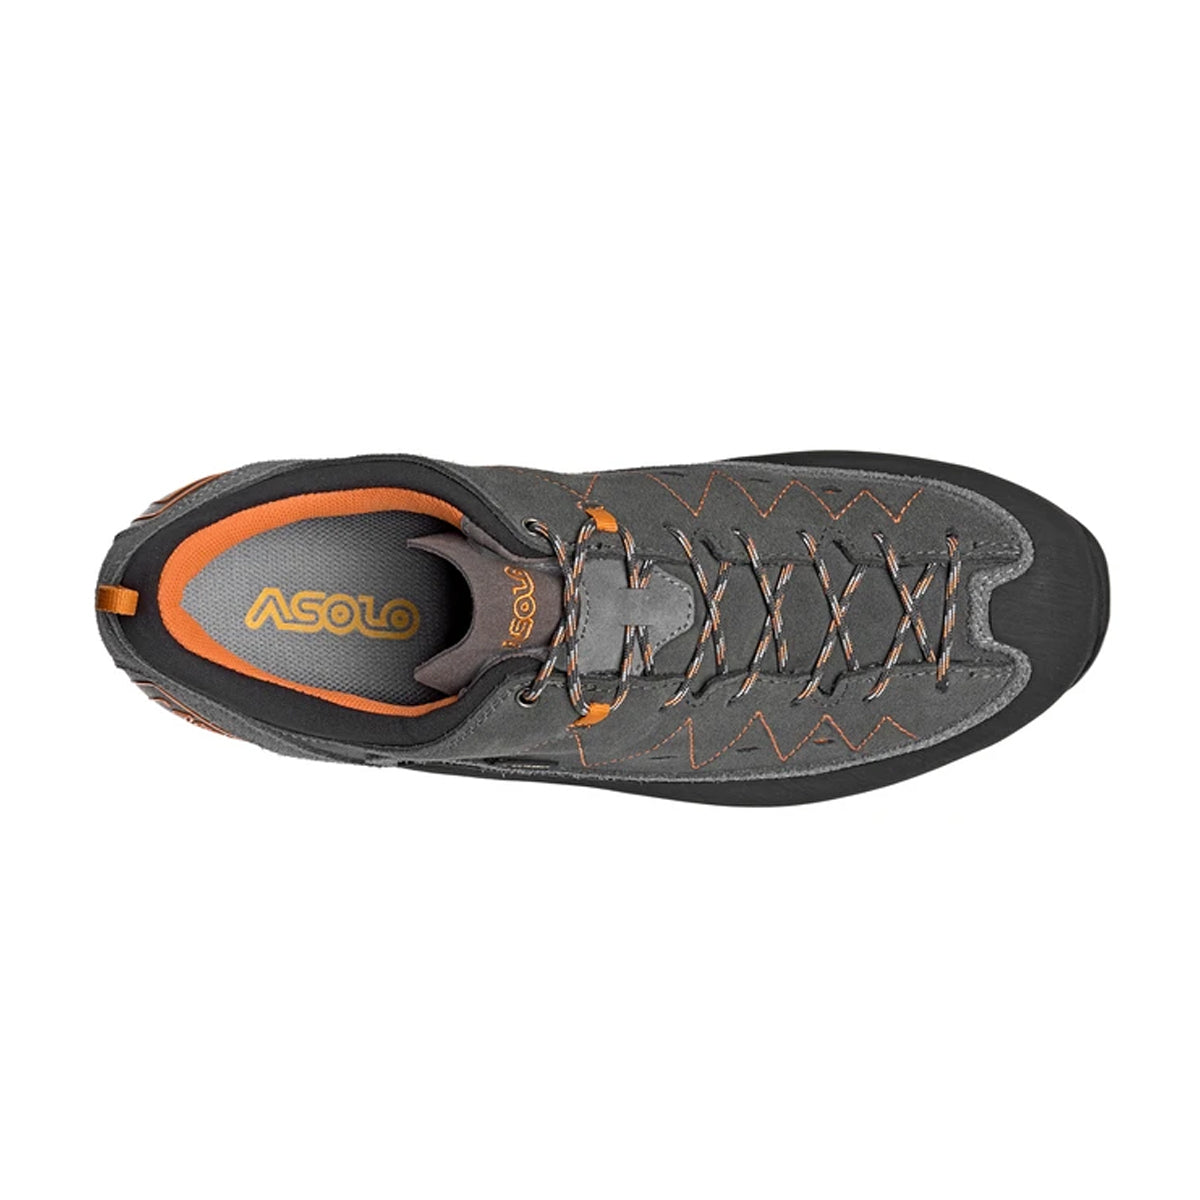 Asolo Apex in  by GOHUNT | Asolo - GOHUNT Shop